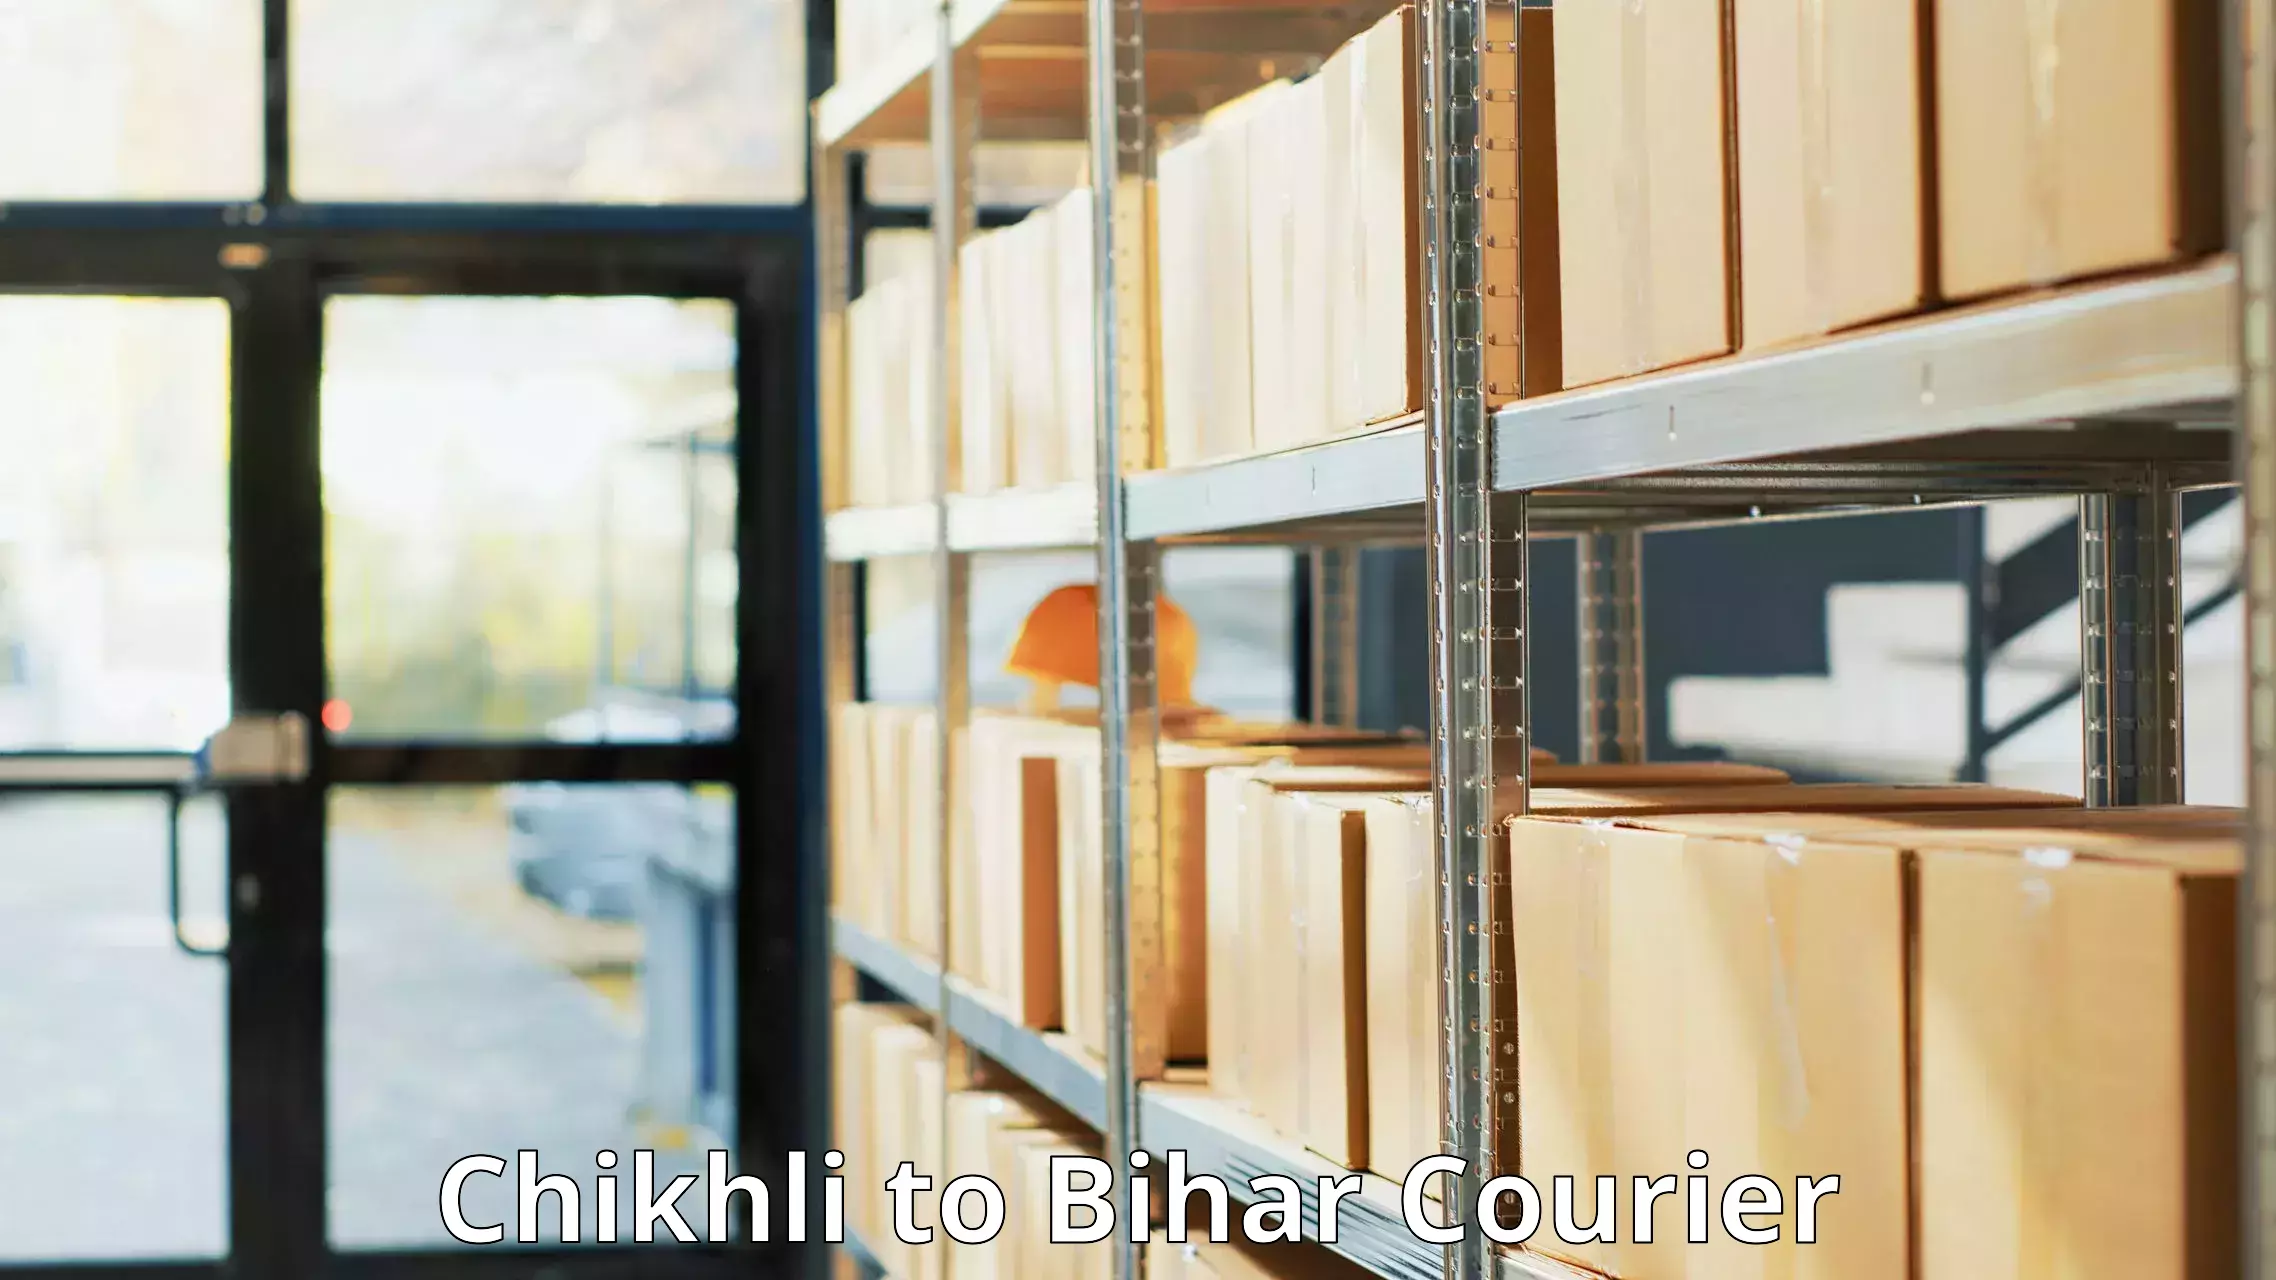 Multi-service courier options Chikhli to Mairwa